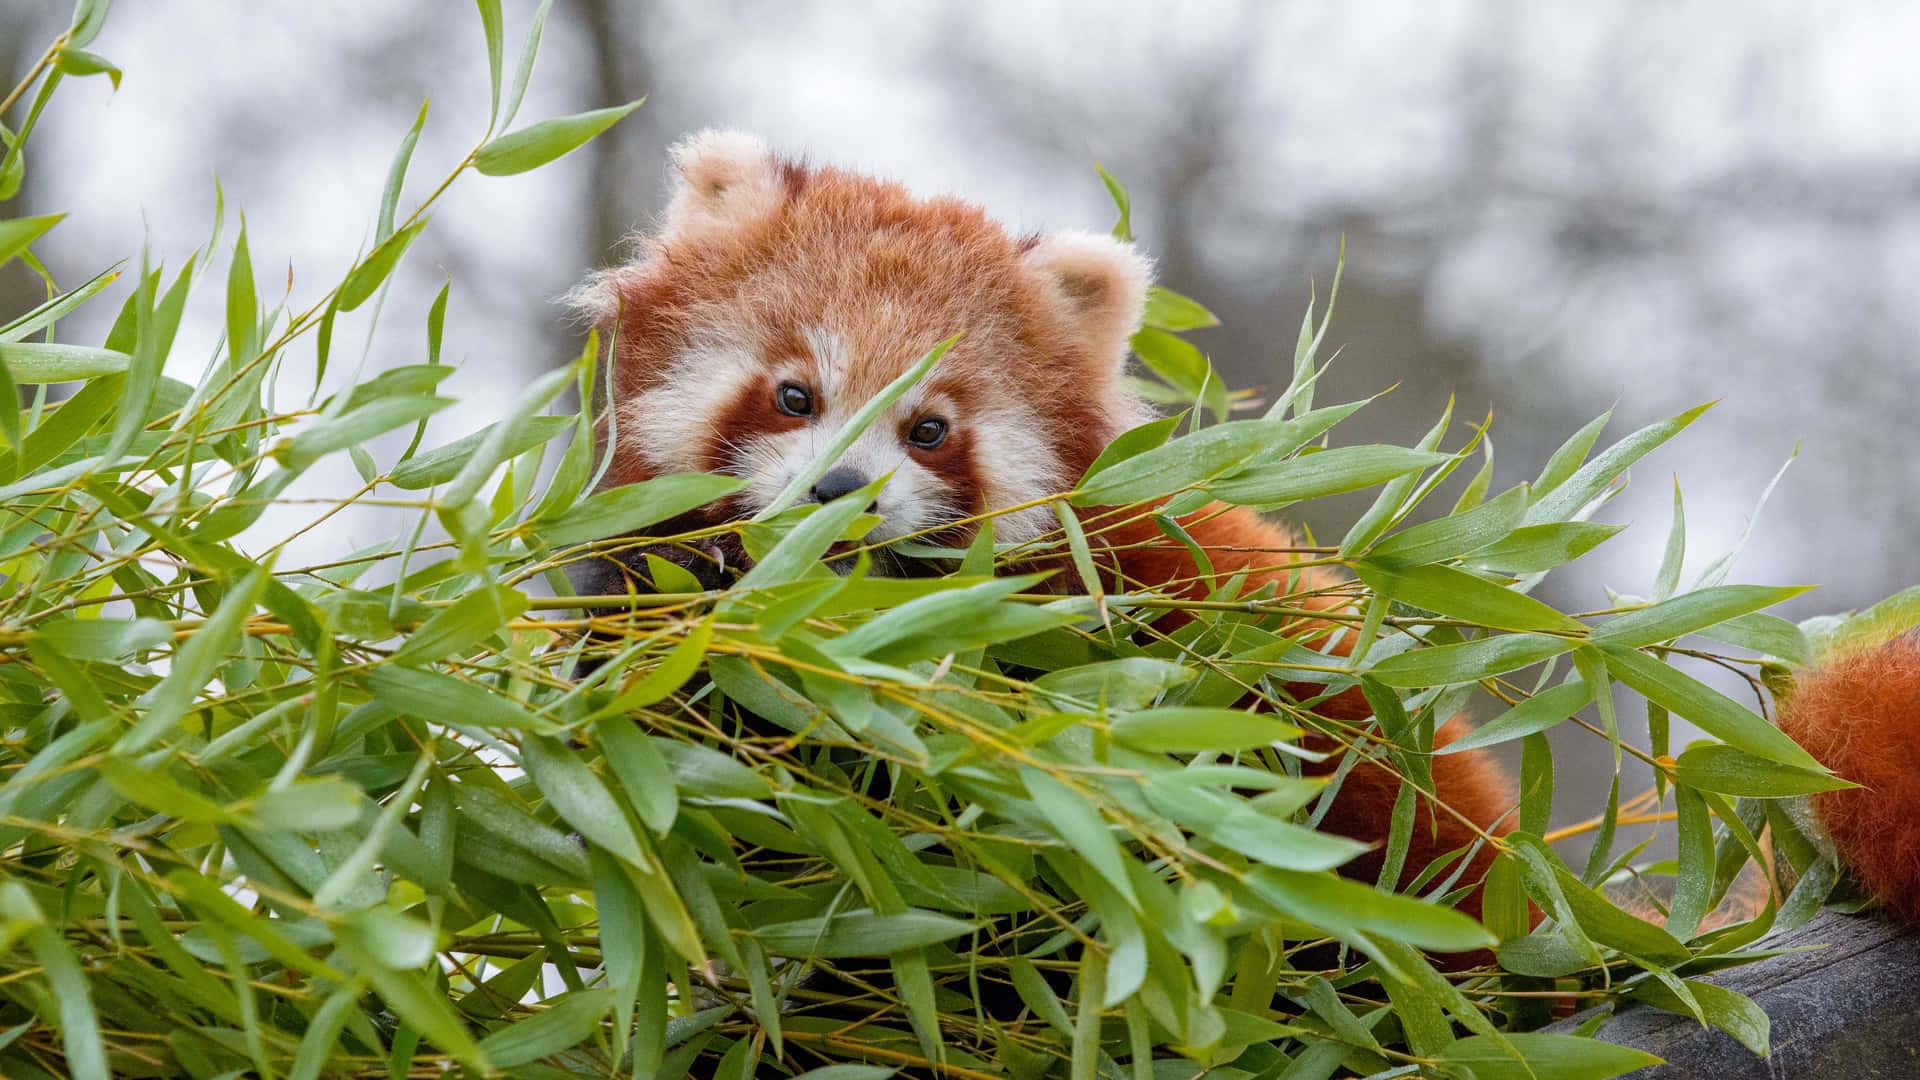 "Cuddled up in a ball - a Red Panda snuggles up for a nap"